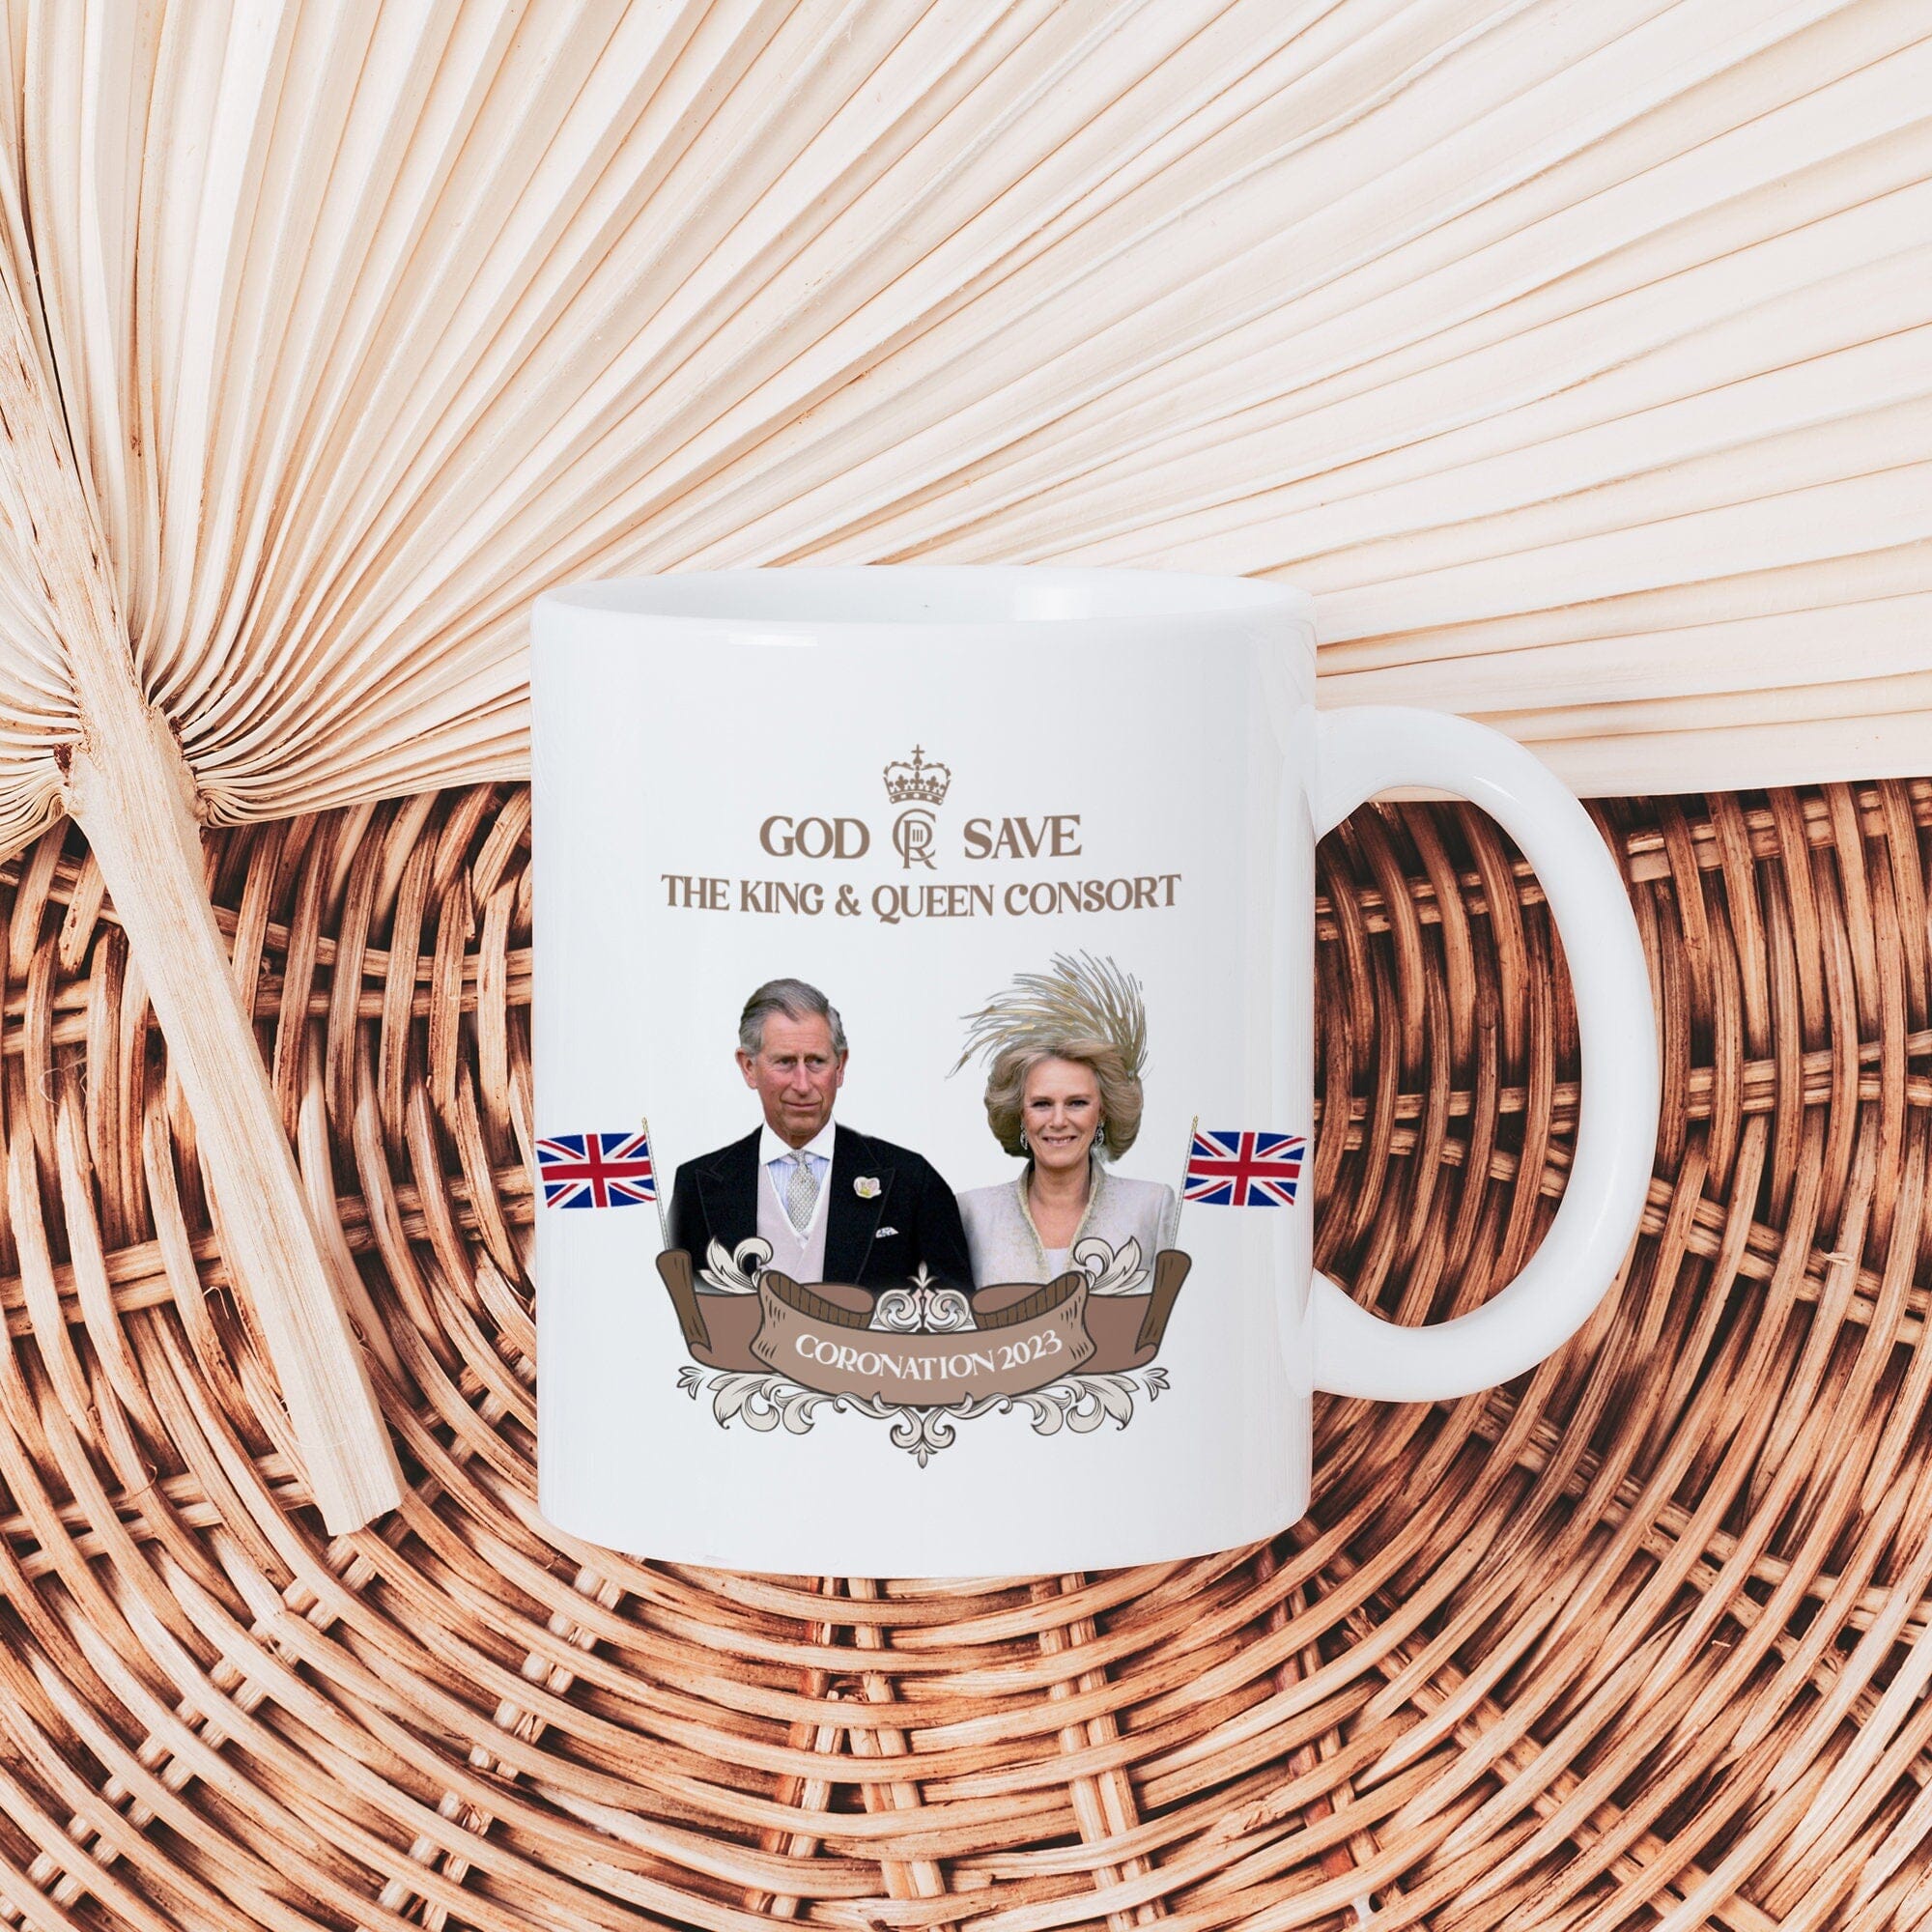 Coronation Mug With Hm King Charles Iii And Camilla Photos, God Save The King And Queen Consort